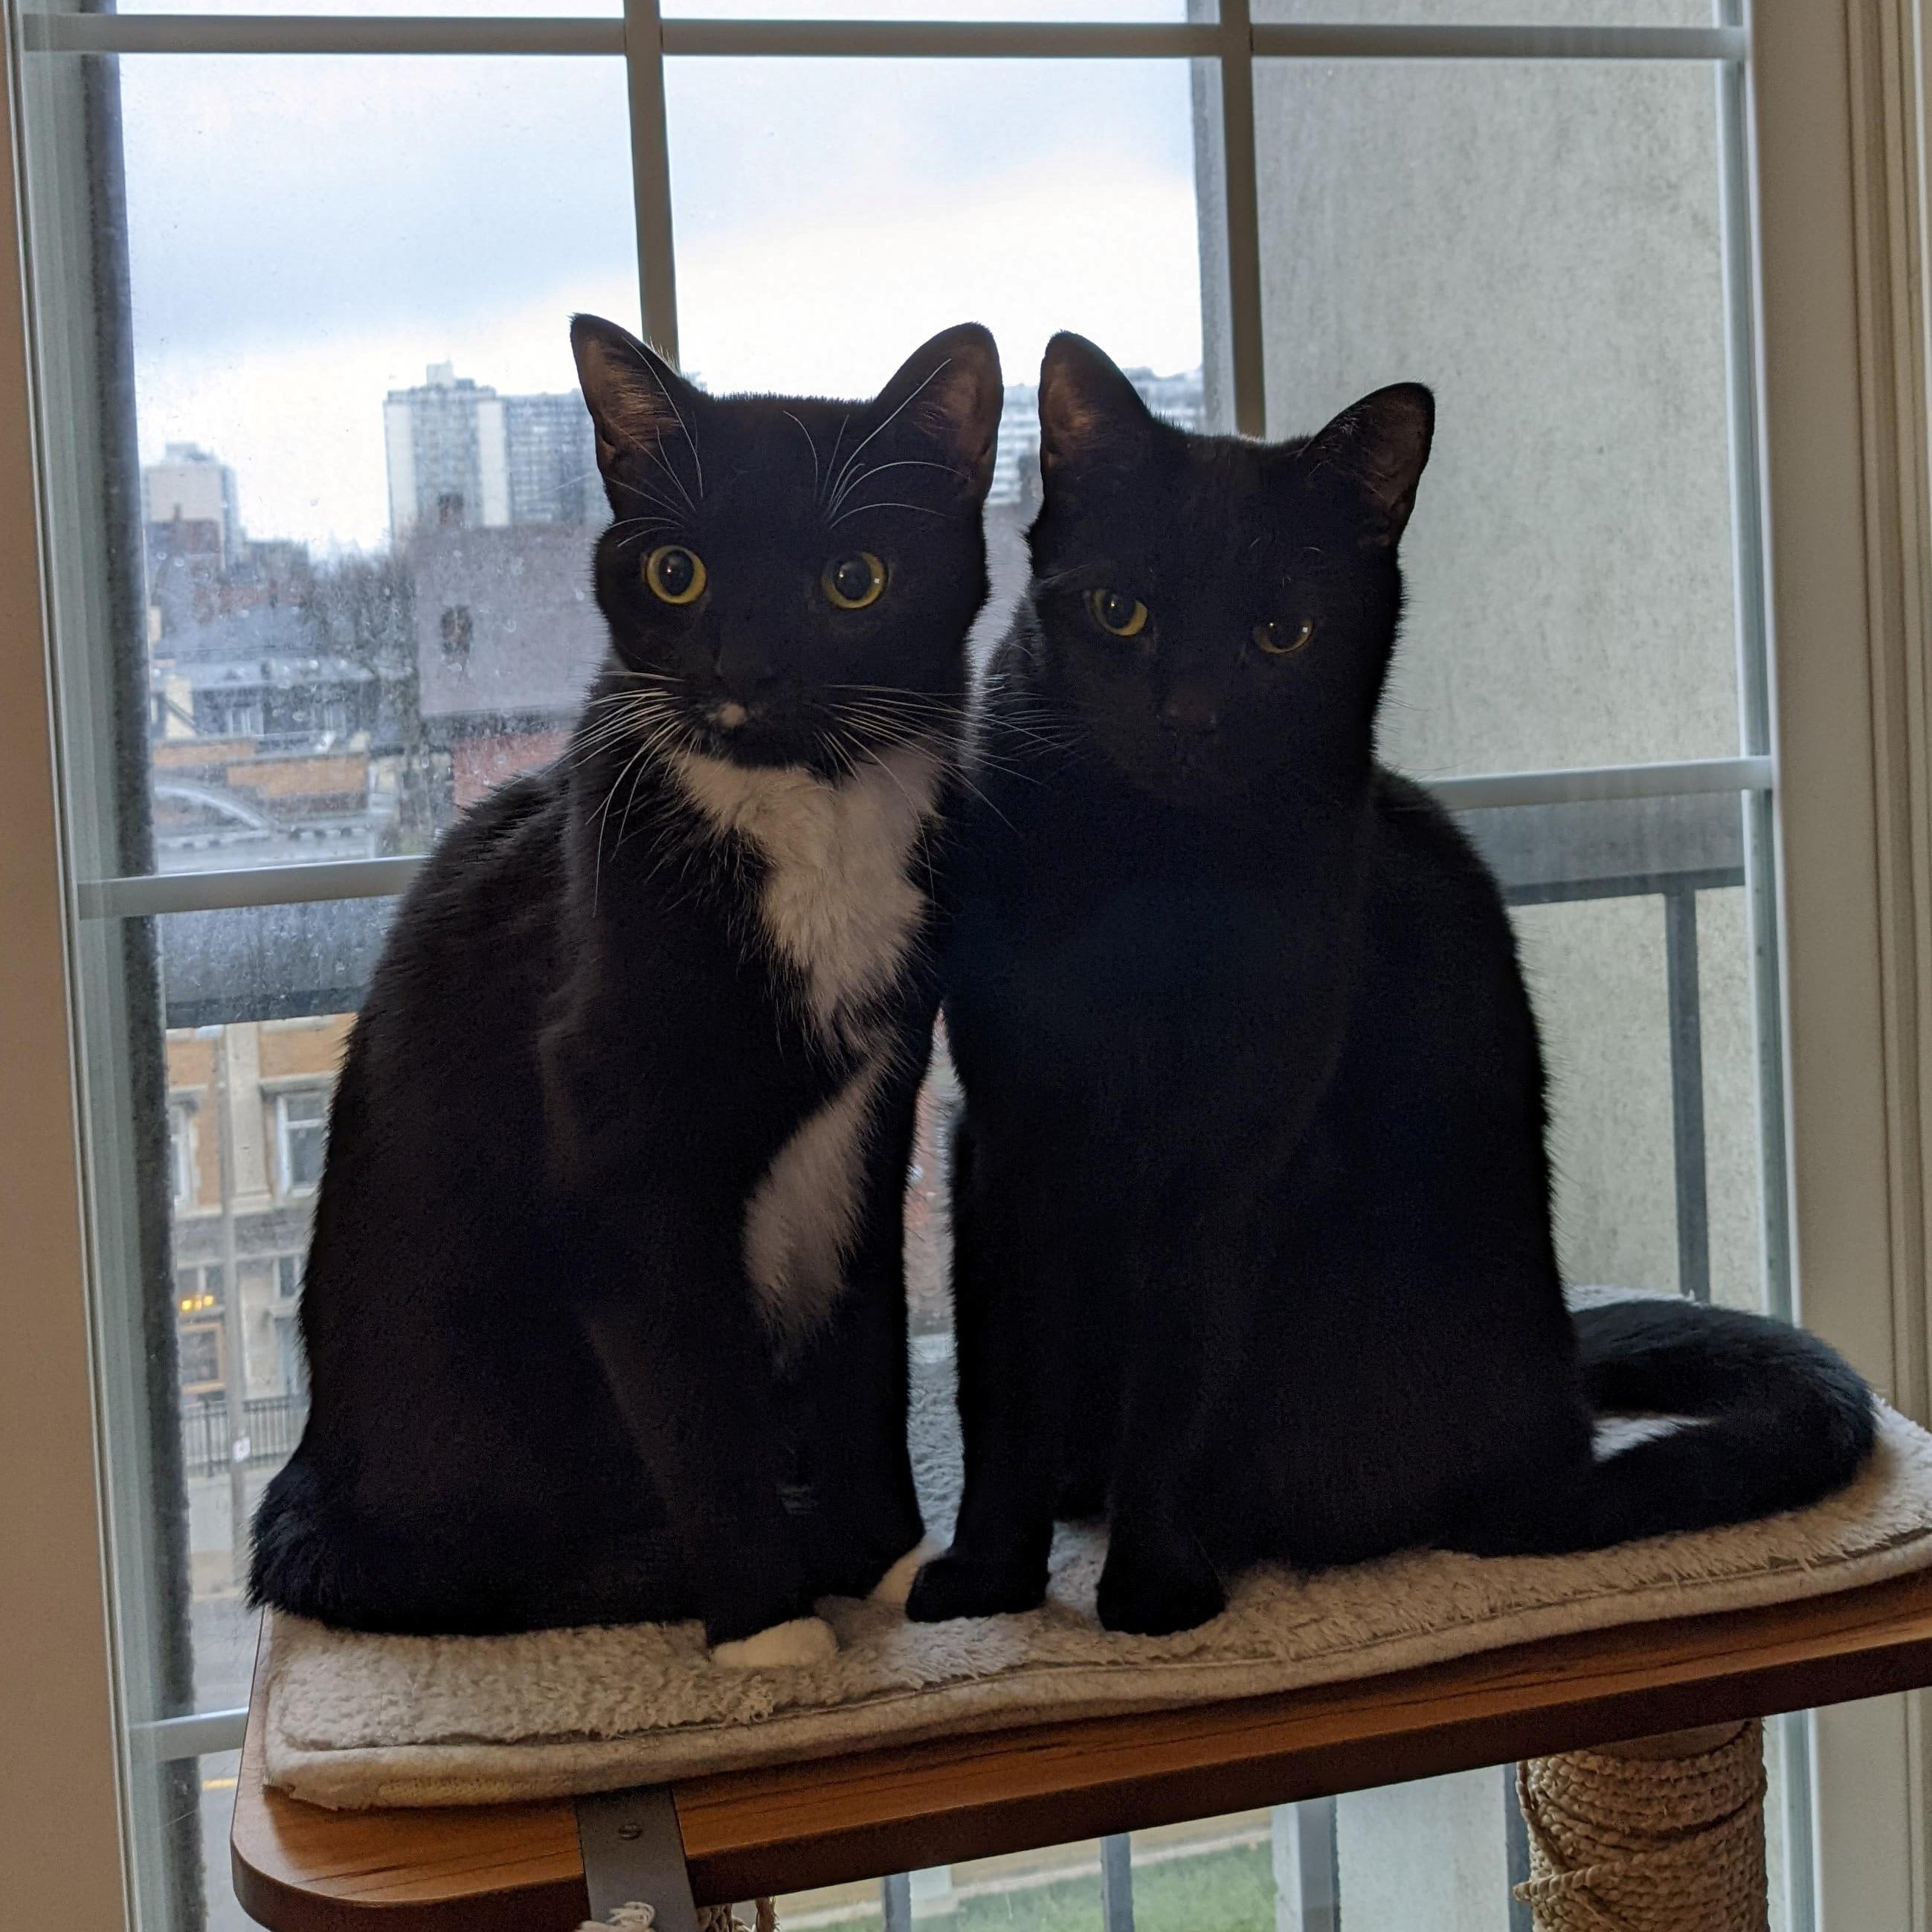 A picture of my cats, Salem and Xena